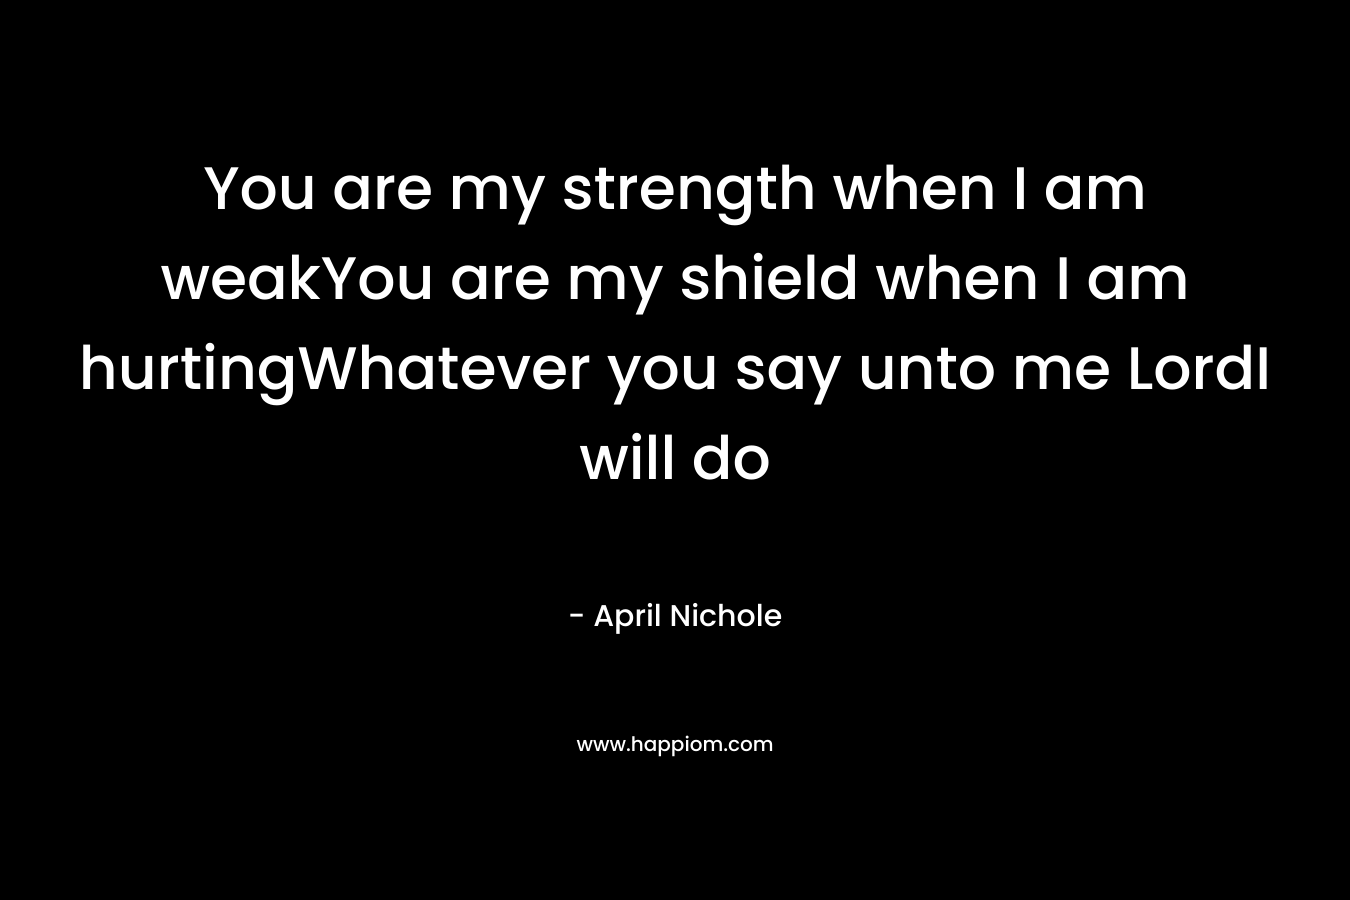 You are my strength when I am weakYou are my shield when I am hurtingWhatever you say unto me LordI will do – April Nichole